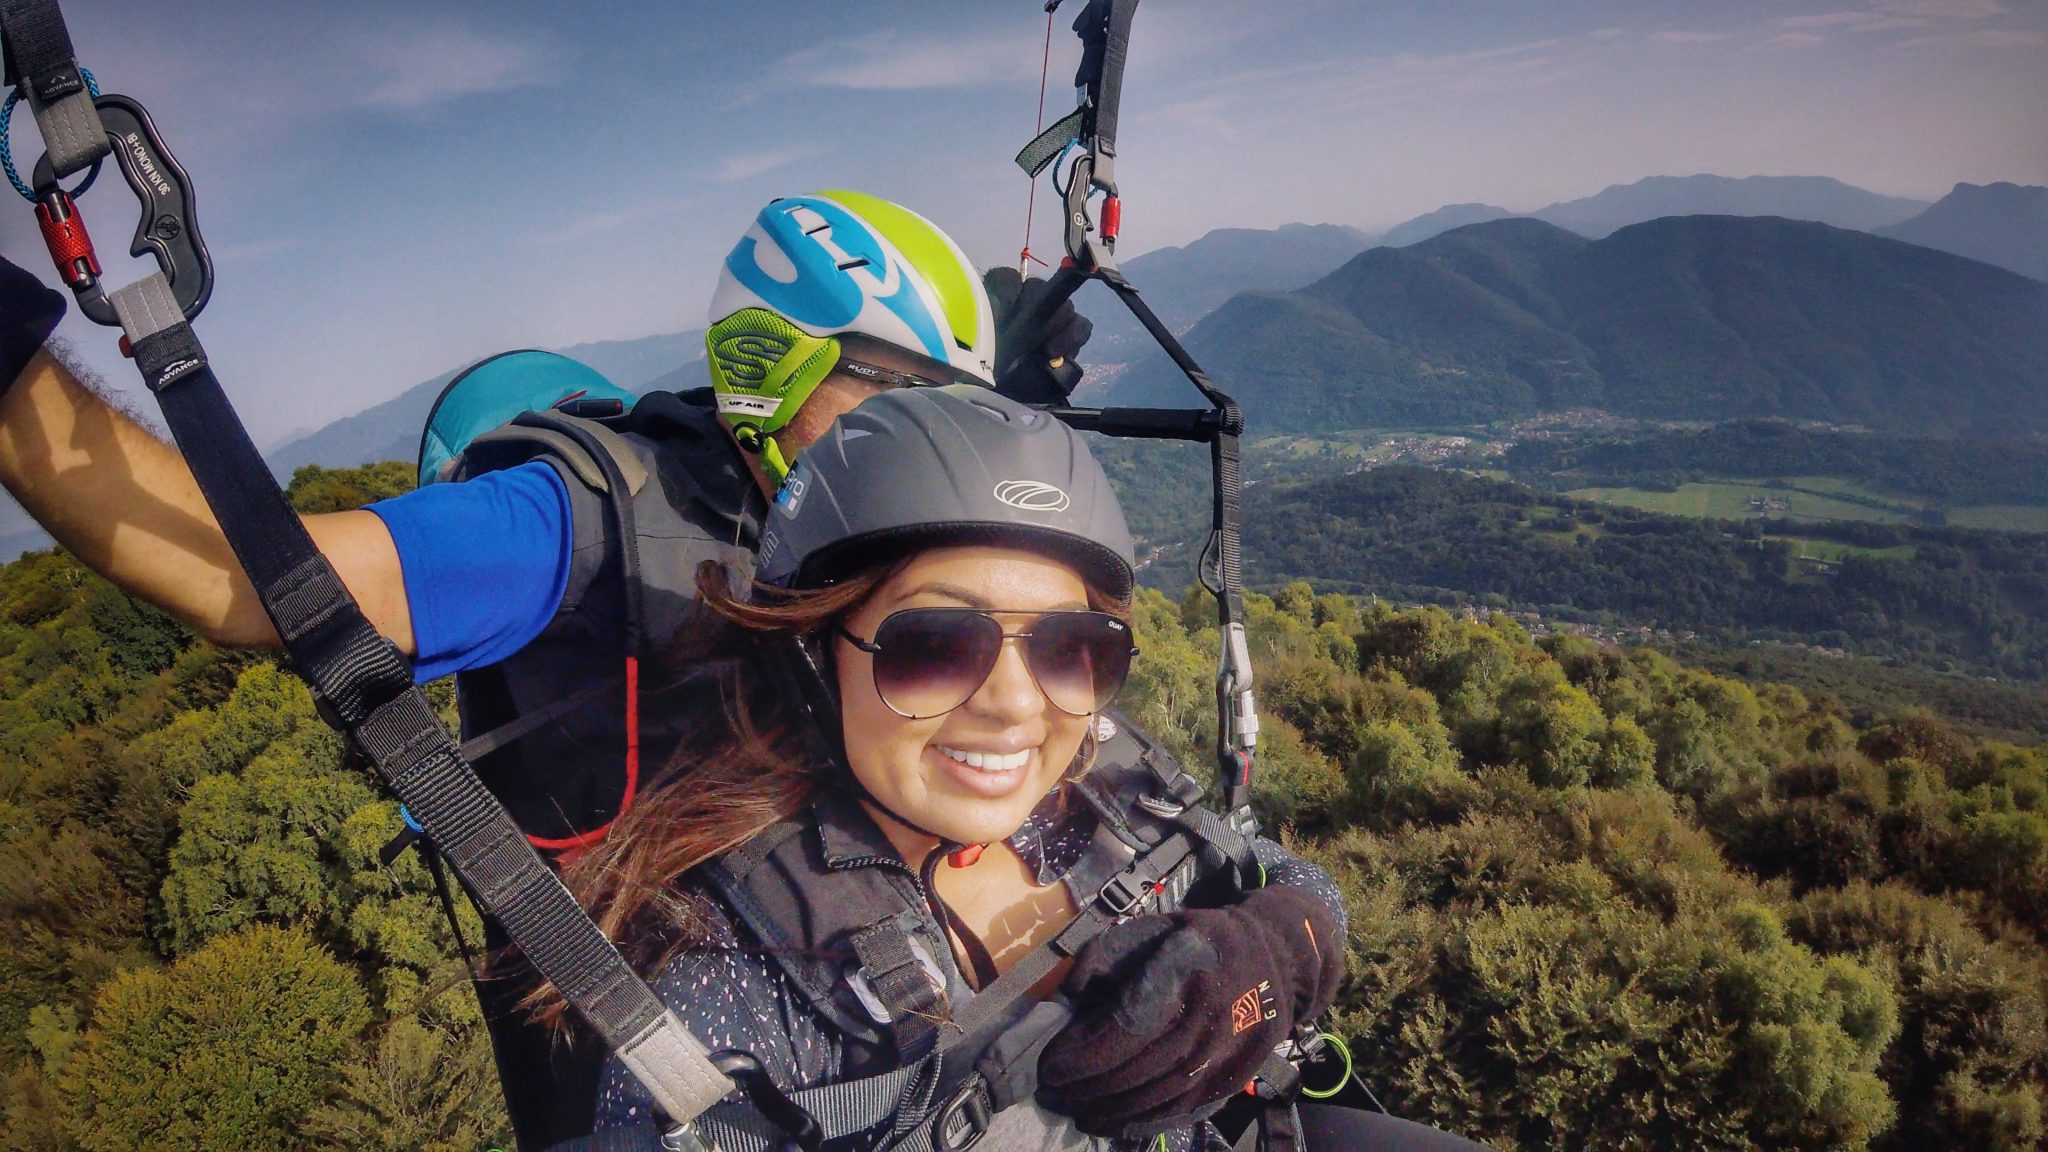 My first time paragliding with FlyTicino